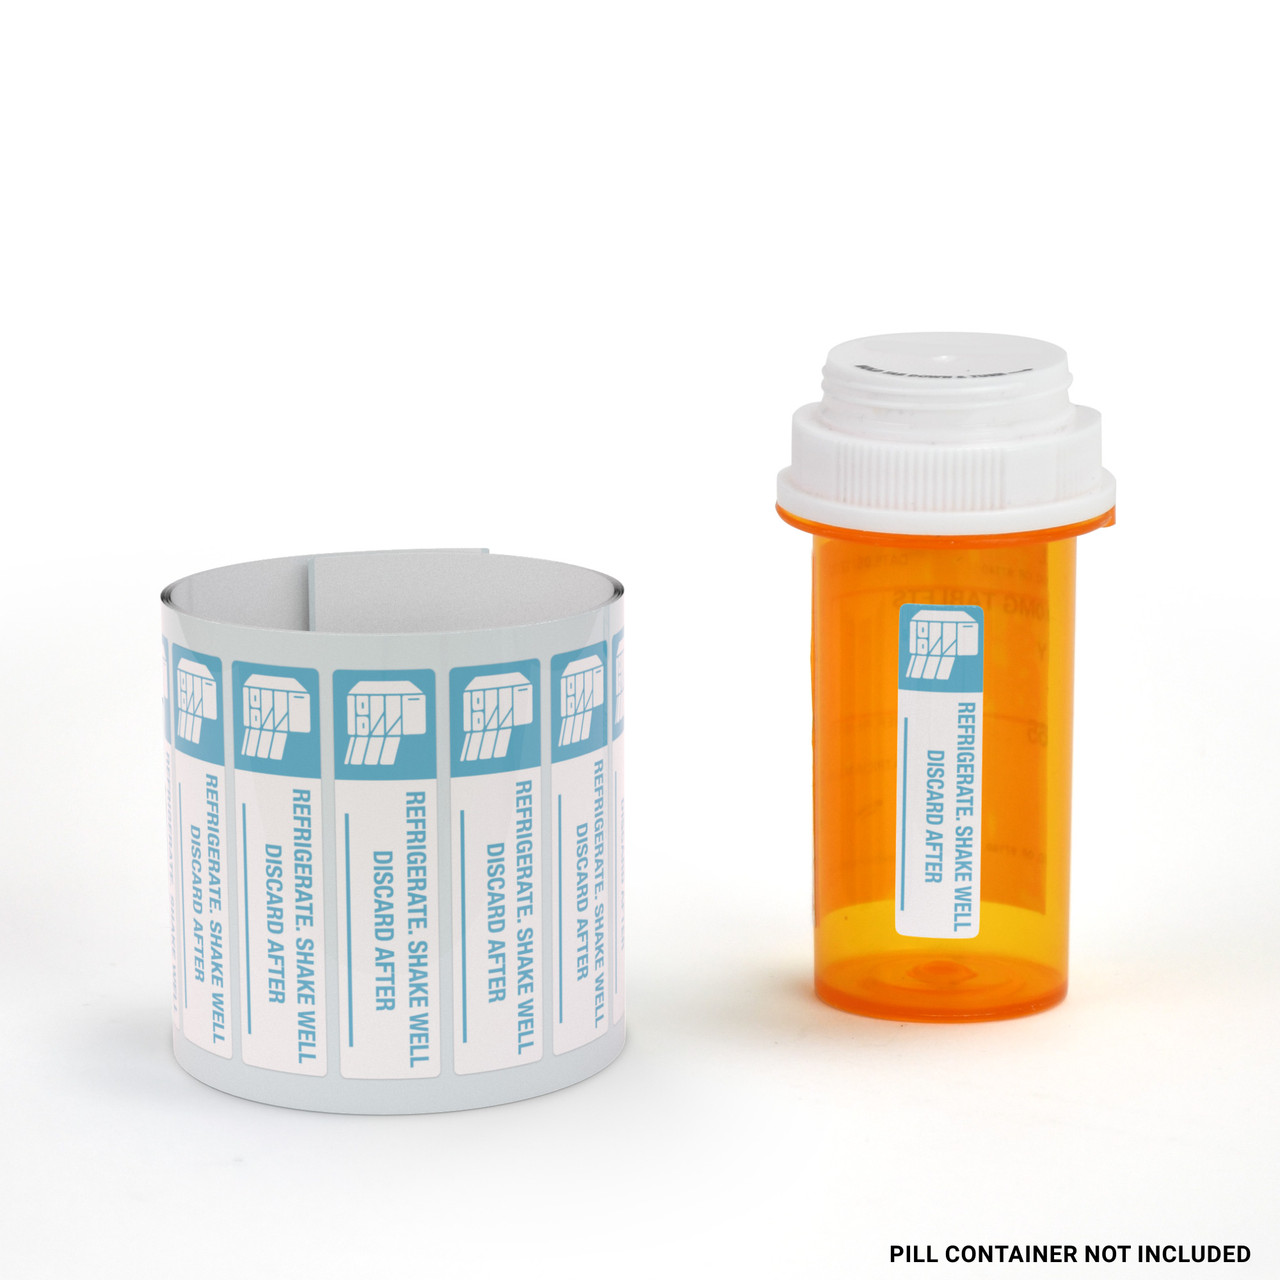 Shake Well - Pharmaceutical Auxiliary Label